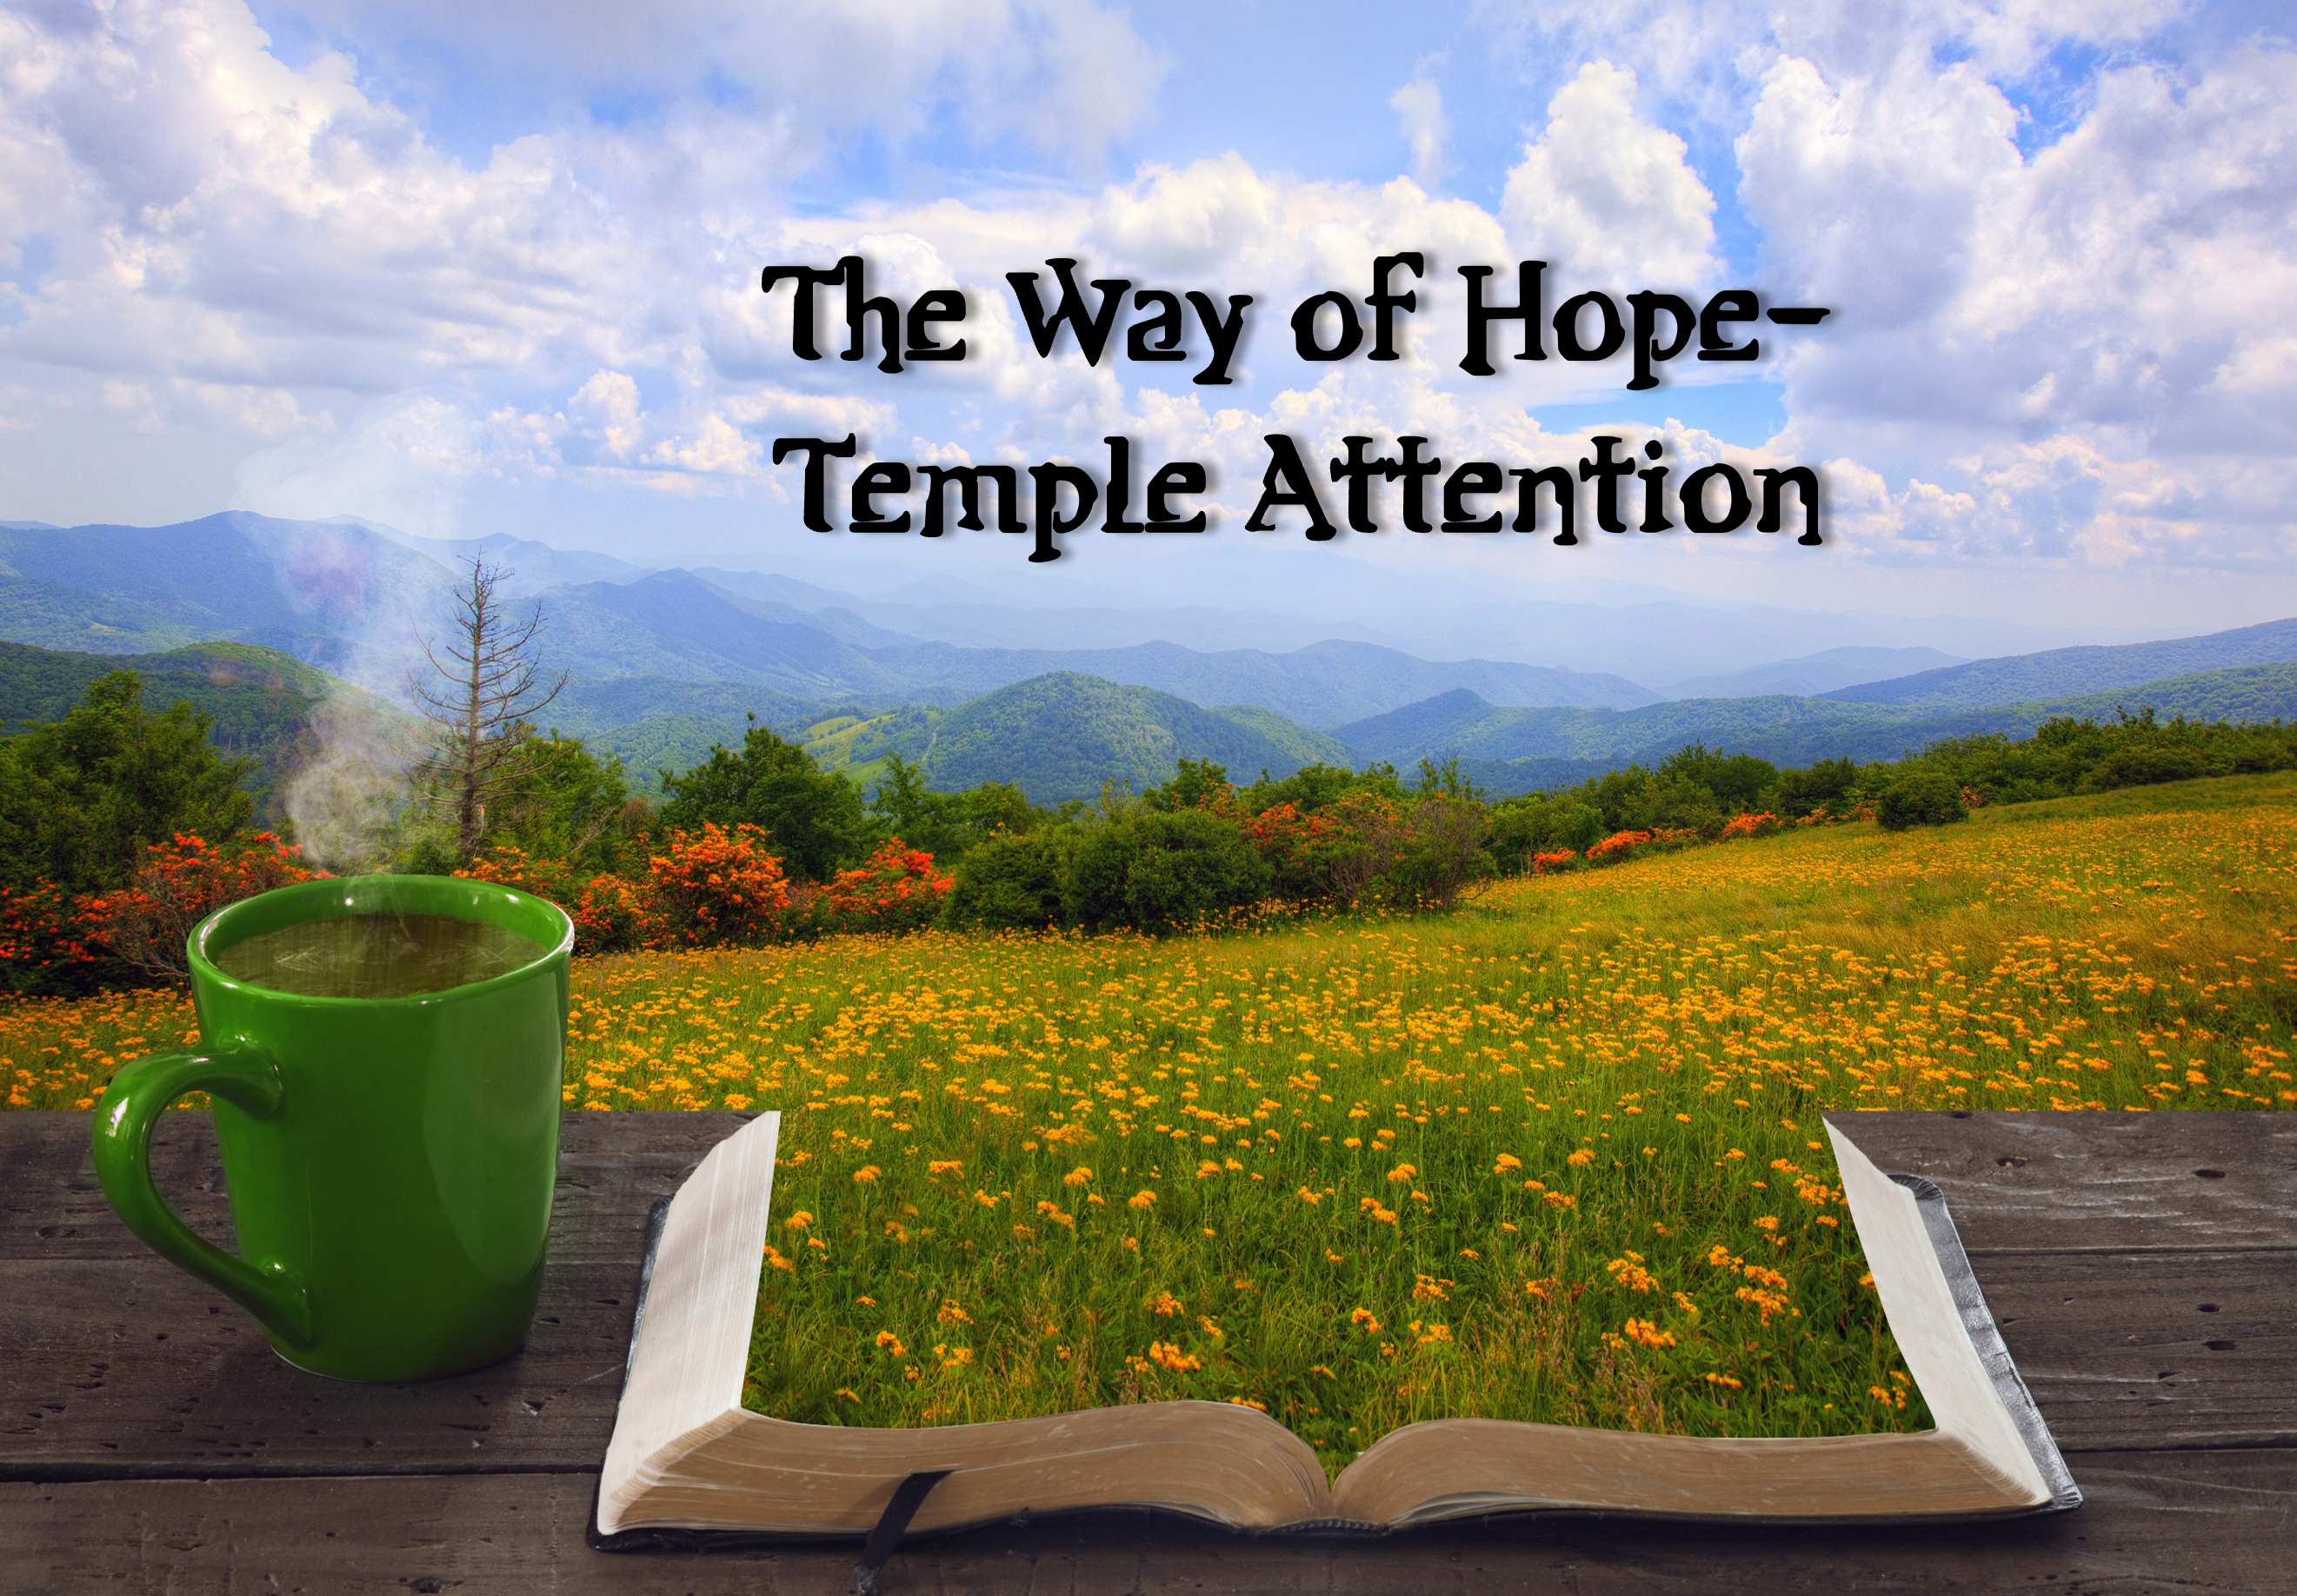 The Way of Hope - Temple Attention